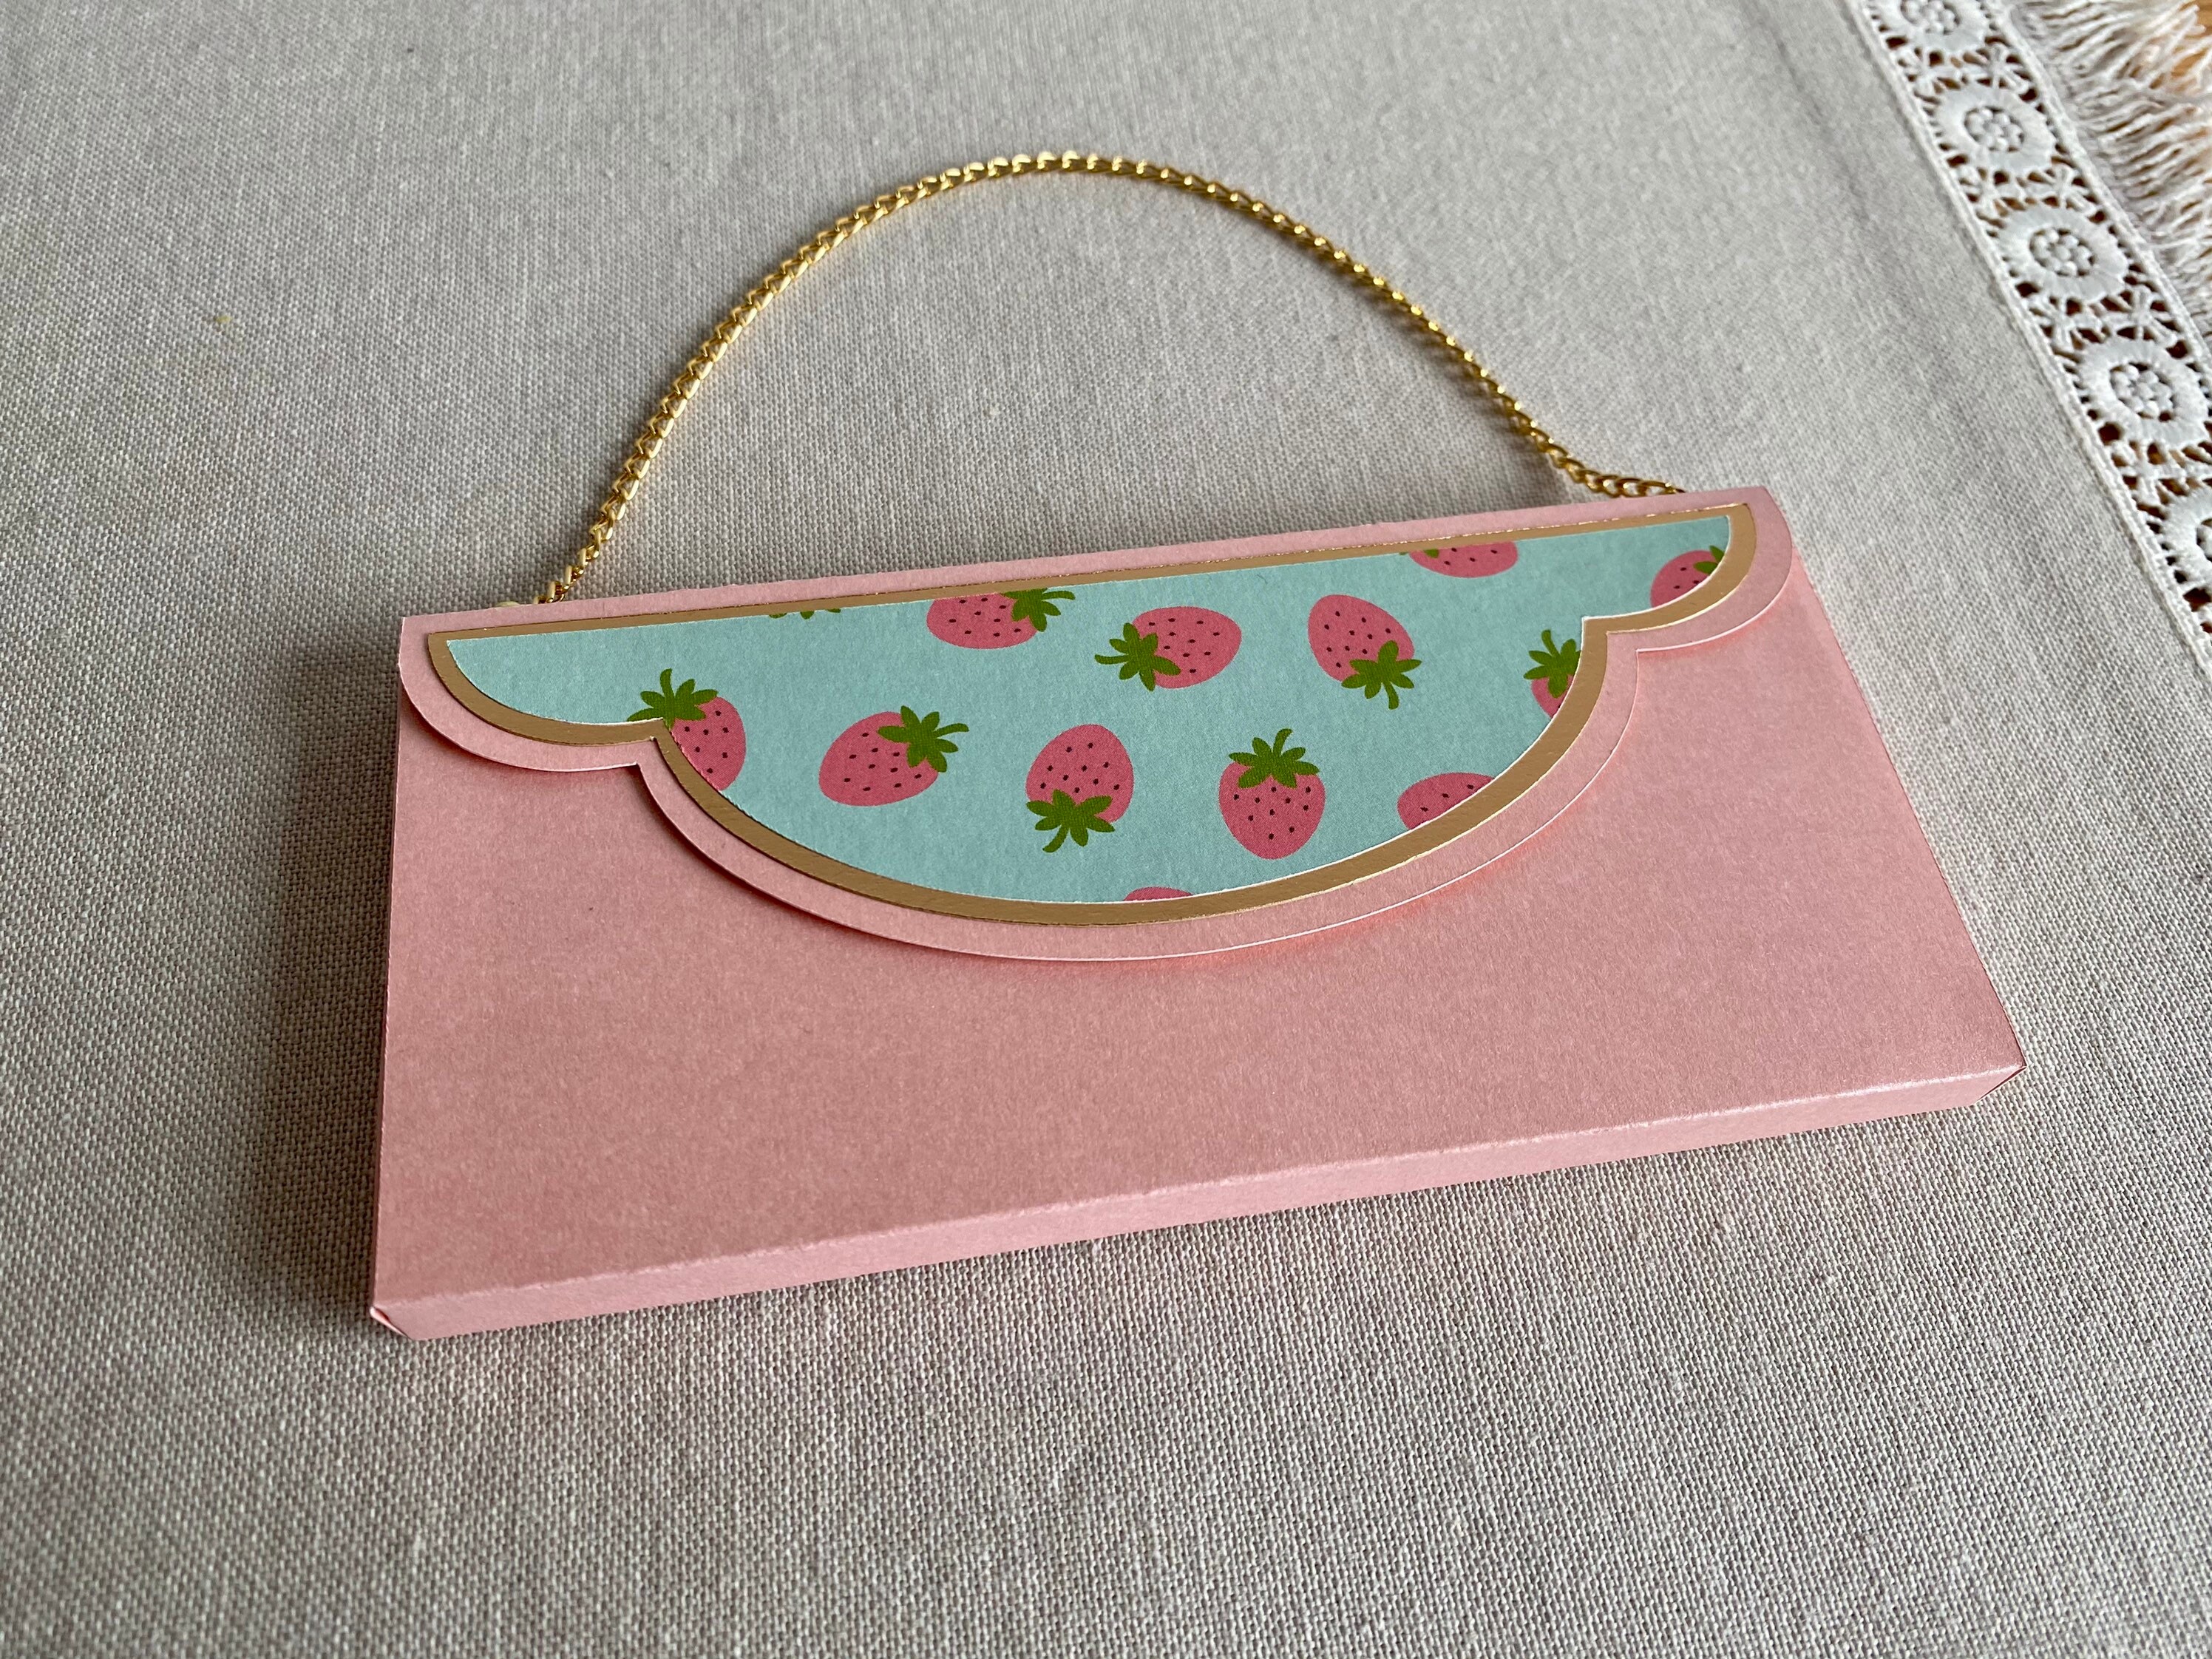 Chocolate Candy Bar Purse Clutch Favor Bag Box Perfect for 